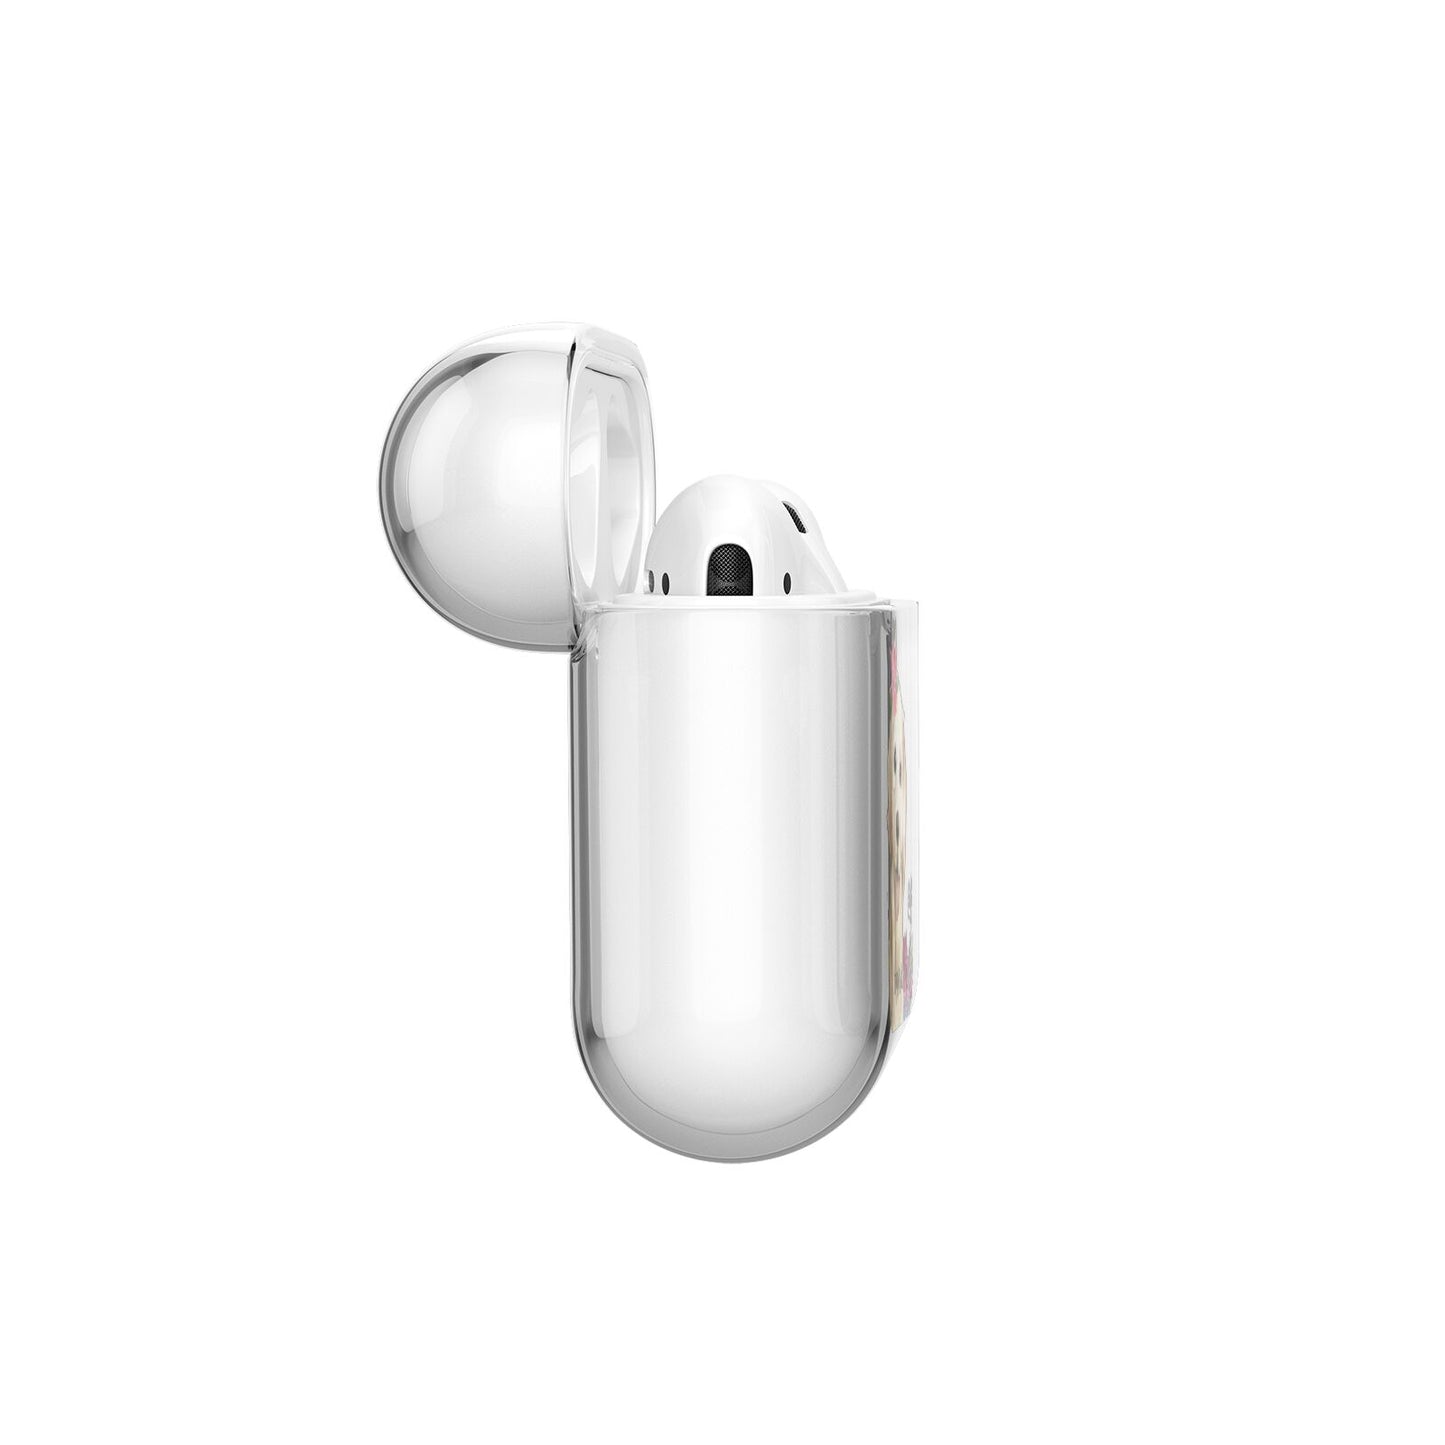 Personalised Golden Retriever Dog AirPods Case Side Angle